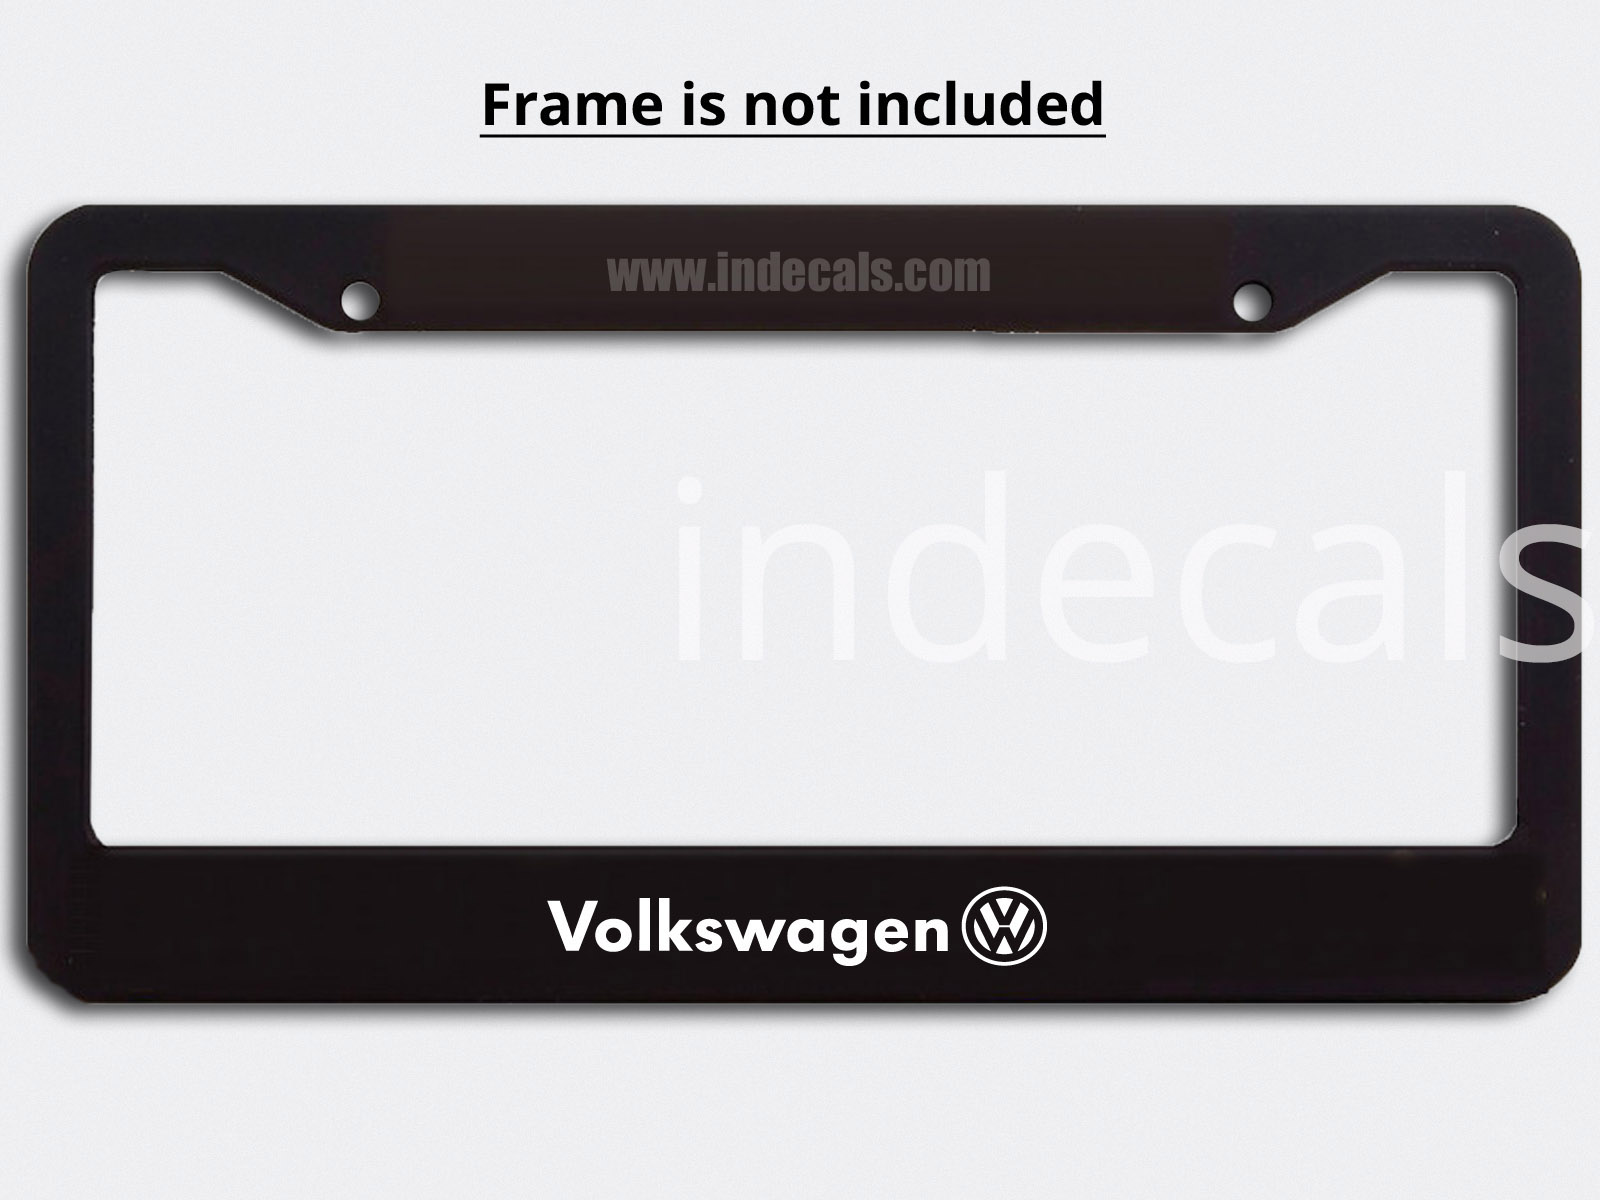 3 x Volkswagen Stickers for Plate Frame - White